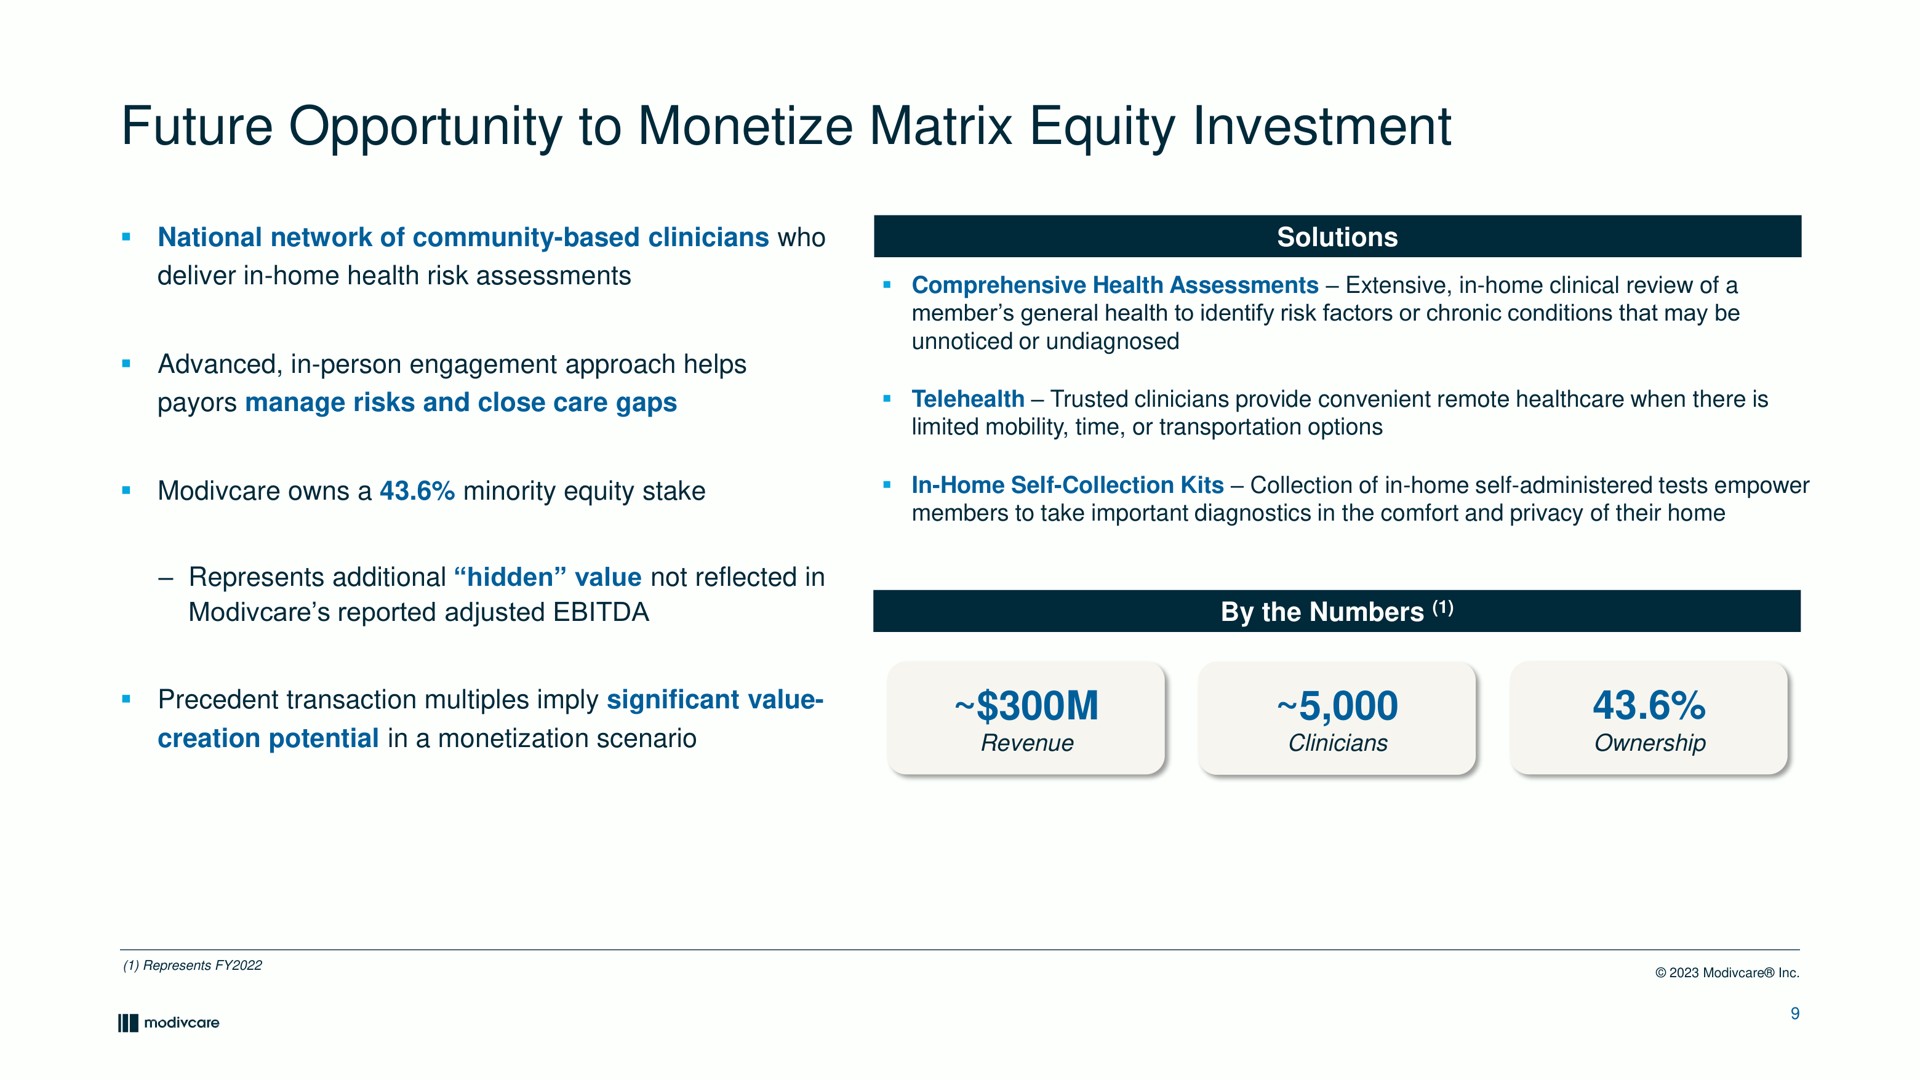 future opportunity to monetize matrix equity investment action multiples imply | ModivCare